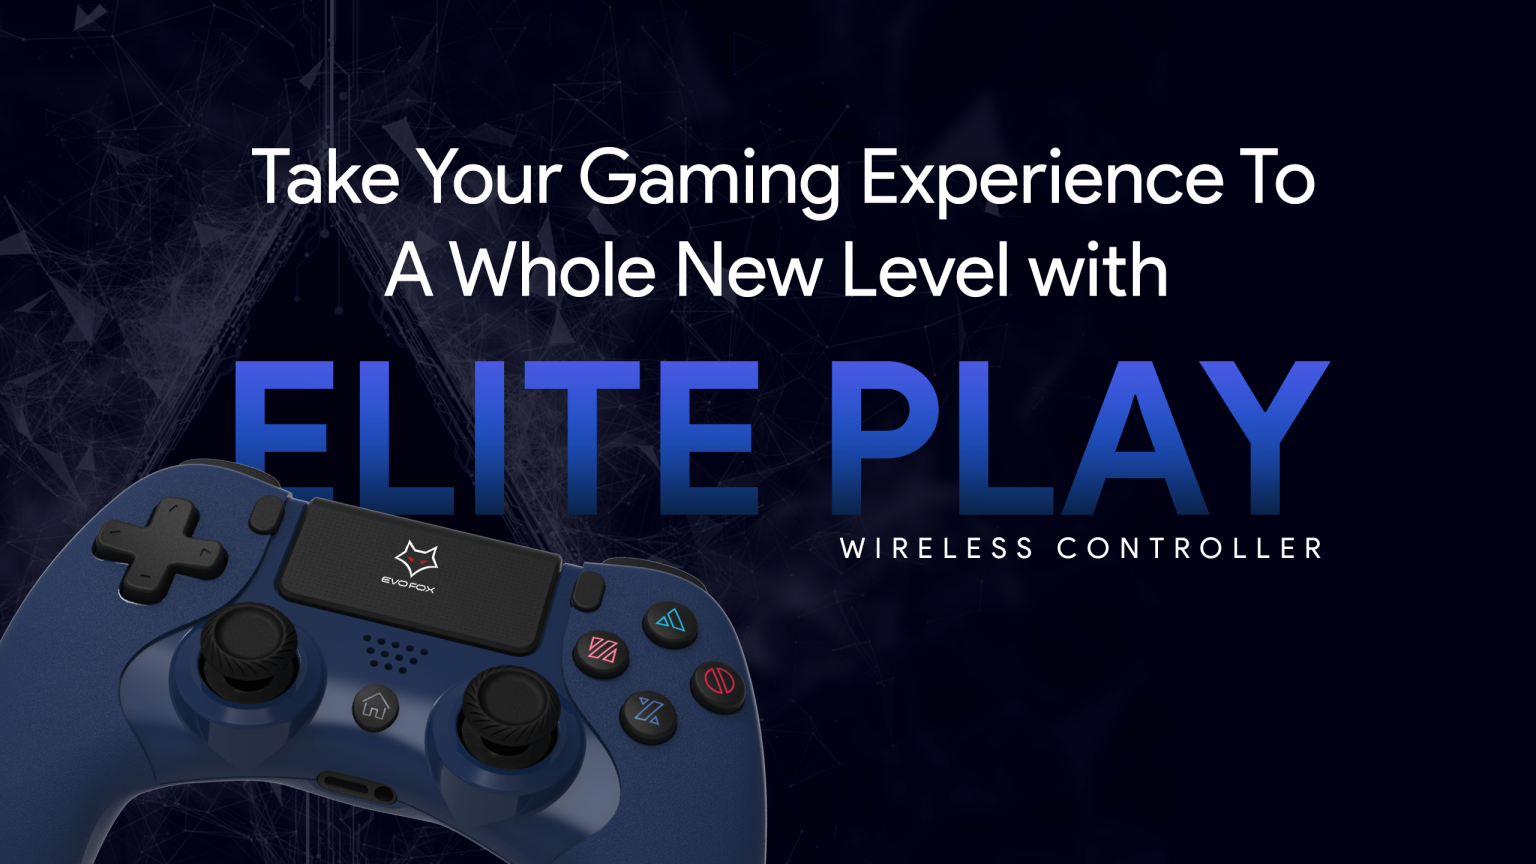 Take Your Gaming Experience To A Whole New Level with Elite Play Wireless Controller